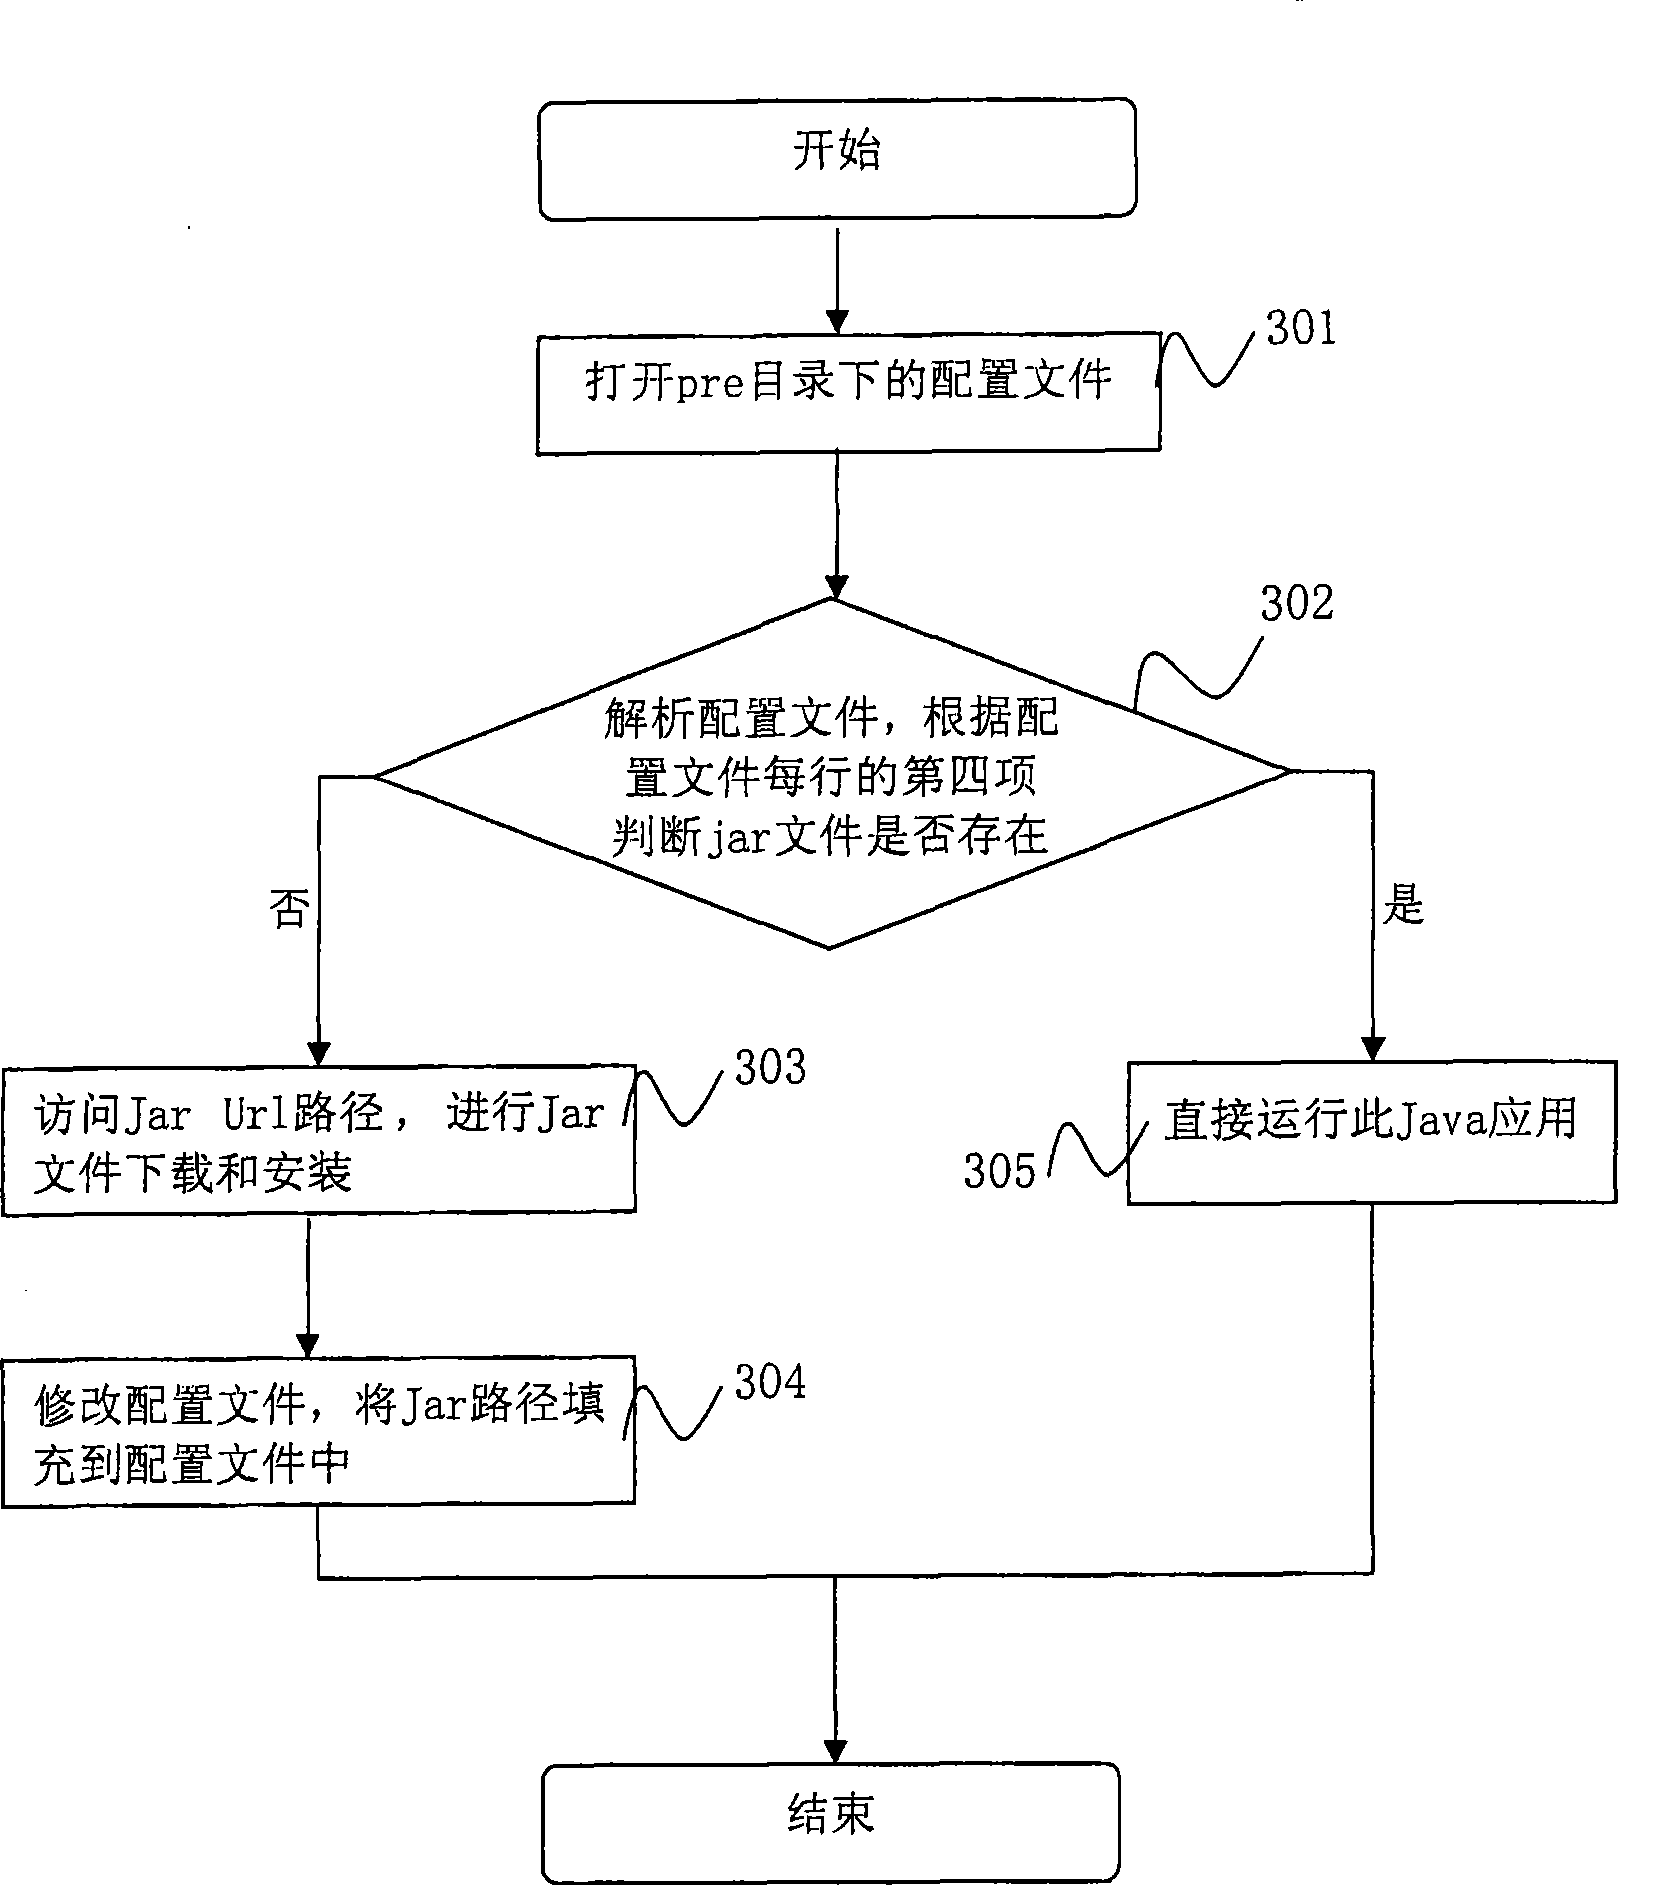 Terminal and method for Java application installation